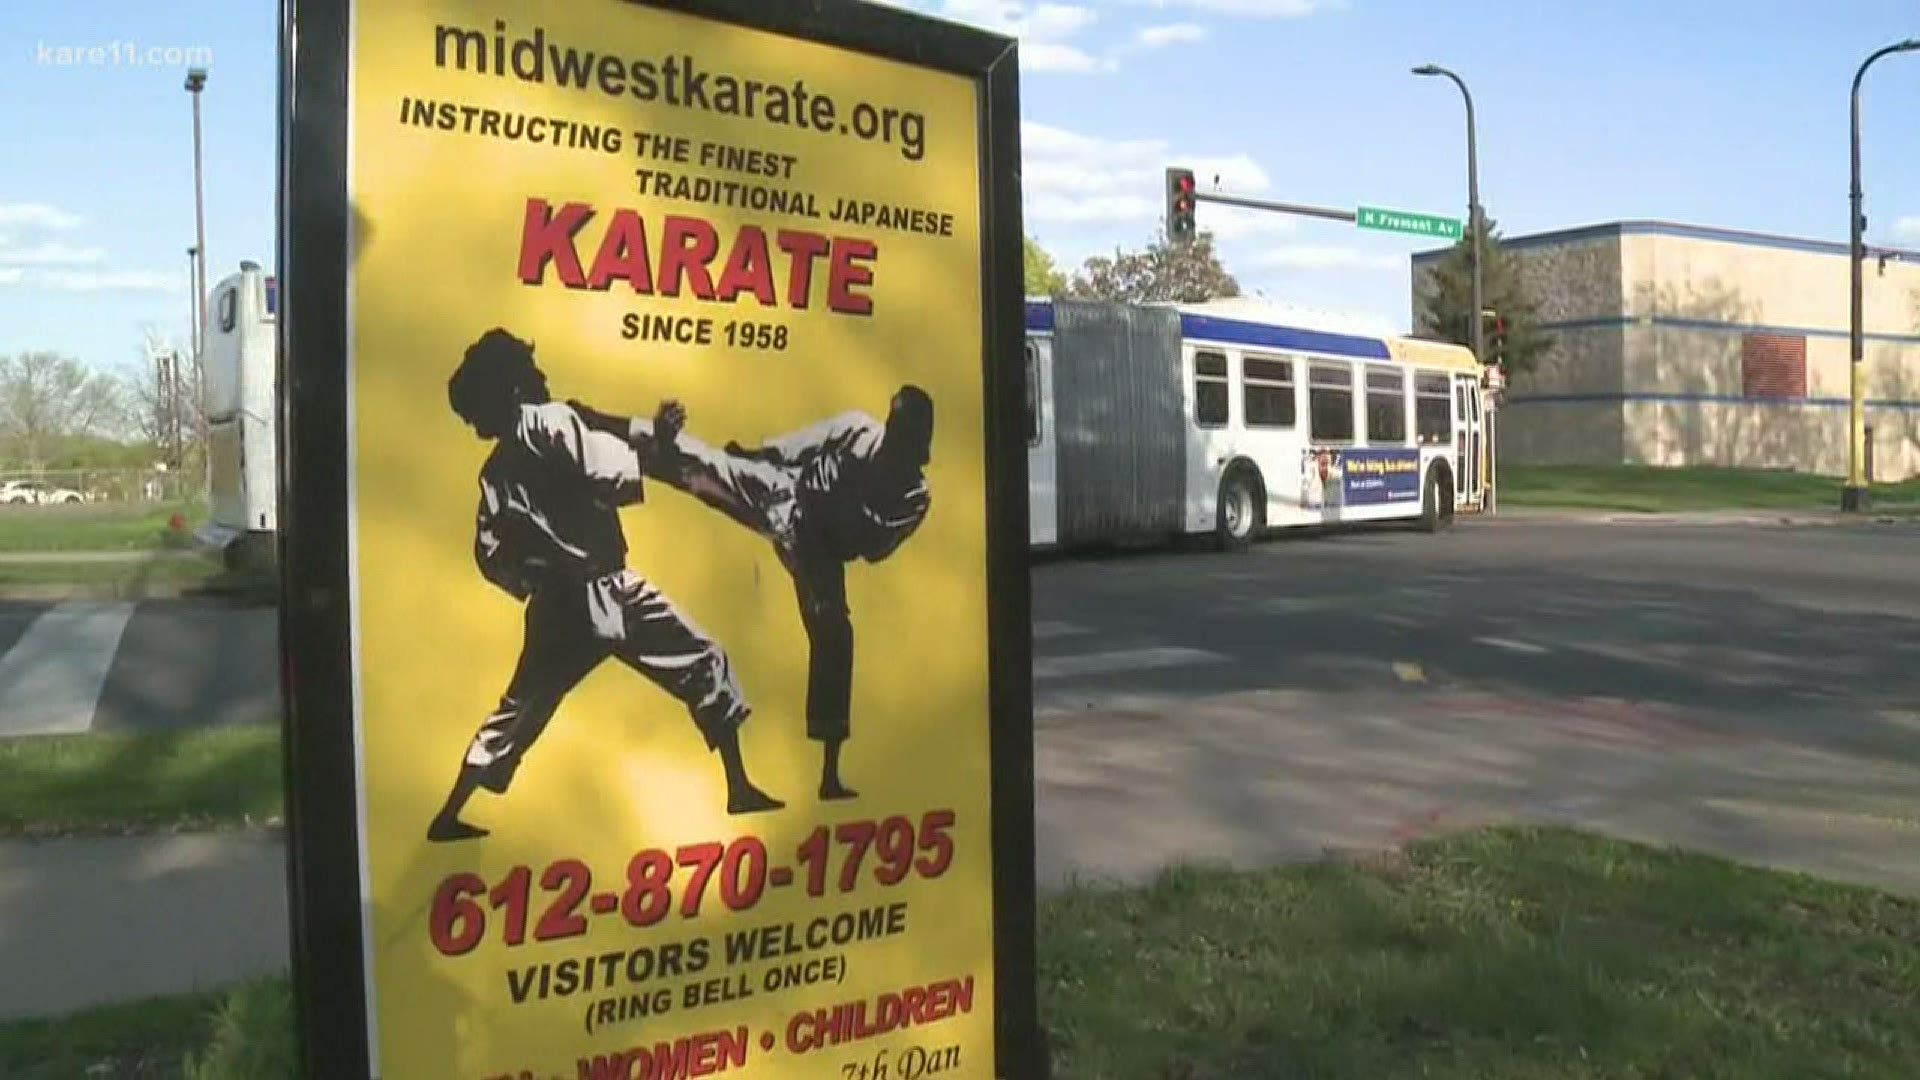 Twin Cities karate instructor is using a unique venue to teach his students karate during the COVID-19 crisis.